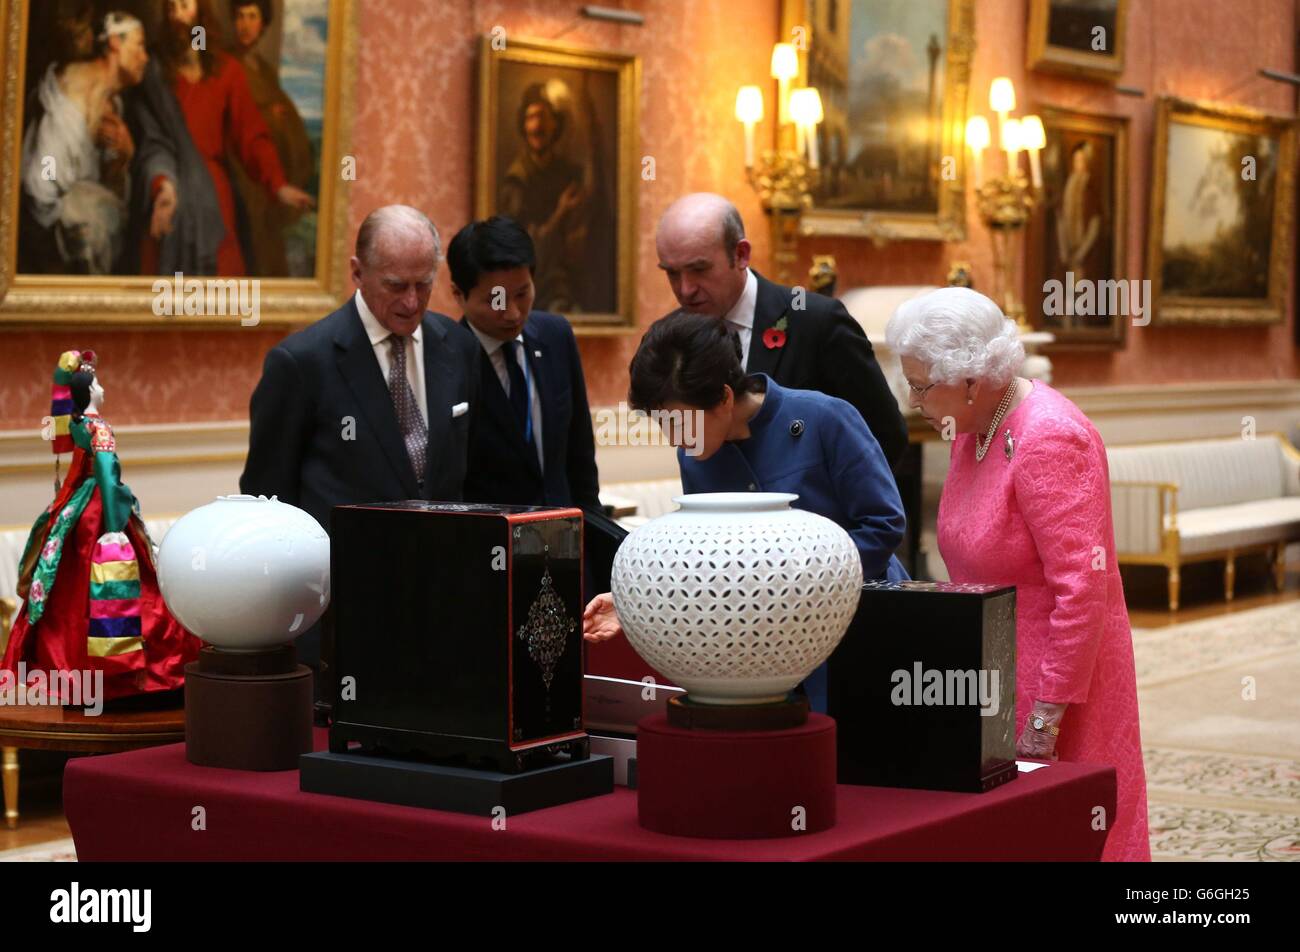 The President of the Republic of Korea Park Geun-Hye (second right), the Duke of Edinburgh (left) and Queen Elizabeth II (right) look on at an exhibition of Korean related items from the Royal Collection and Royal Archives in the Picture Gallery of Buckingham Palace in London. The President is on a state visit to the United Kingdom and during the trip she will attend a state banquet and visit Downing Street. Stock Photo